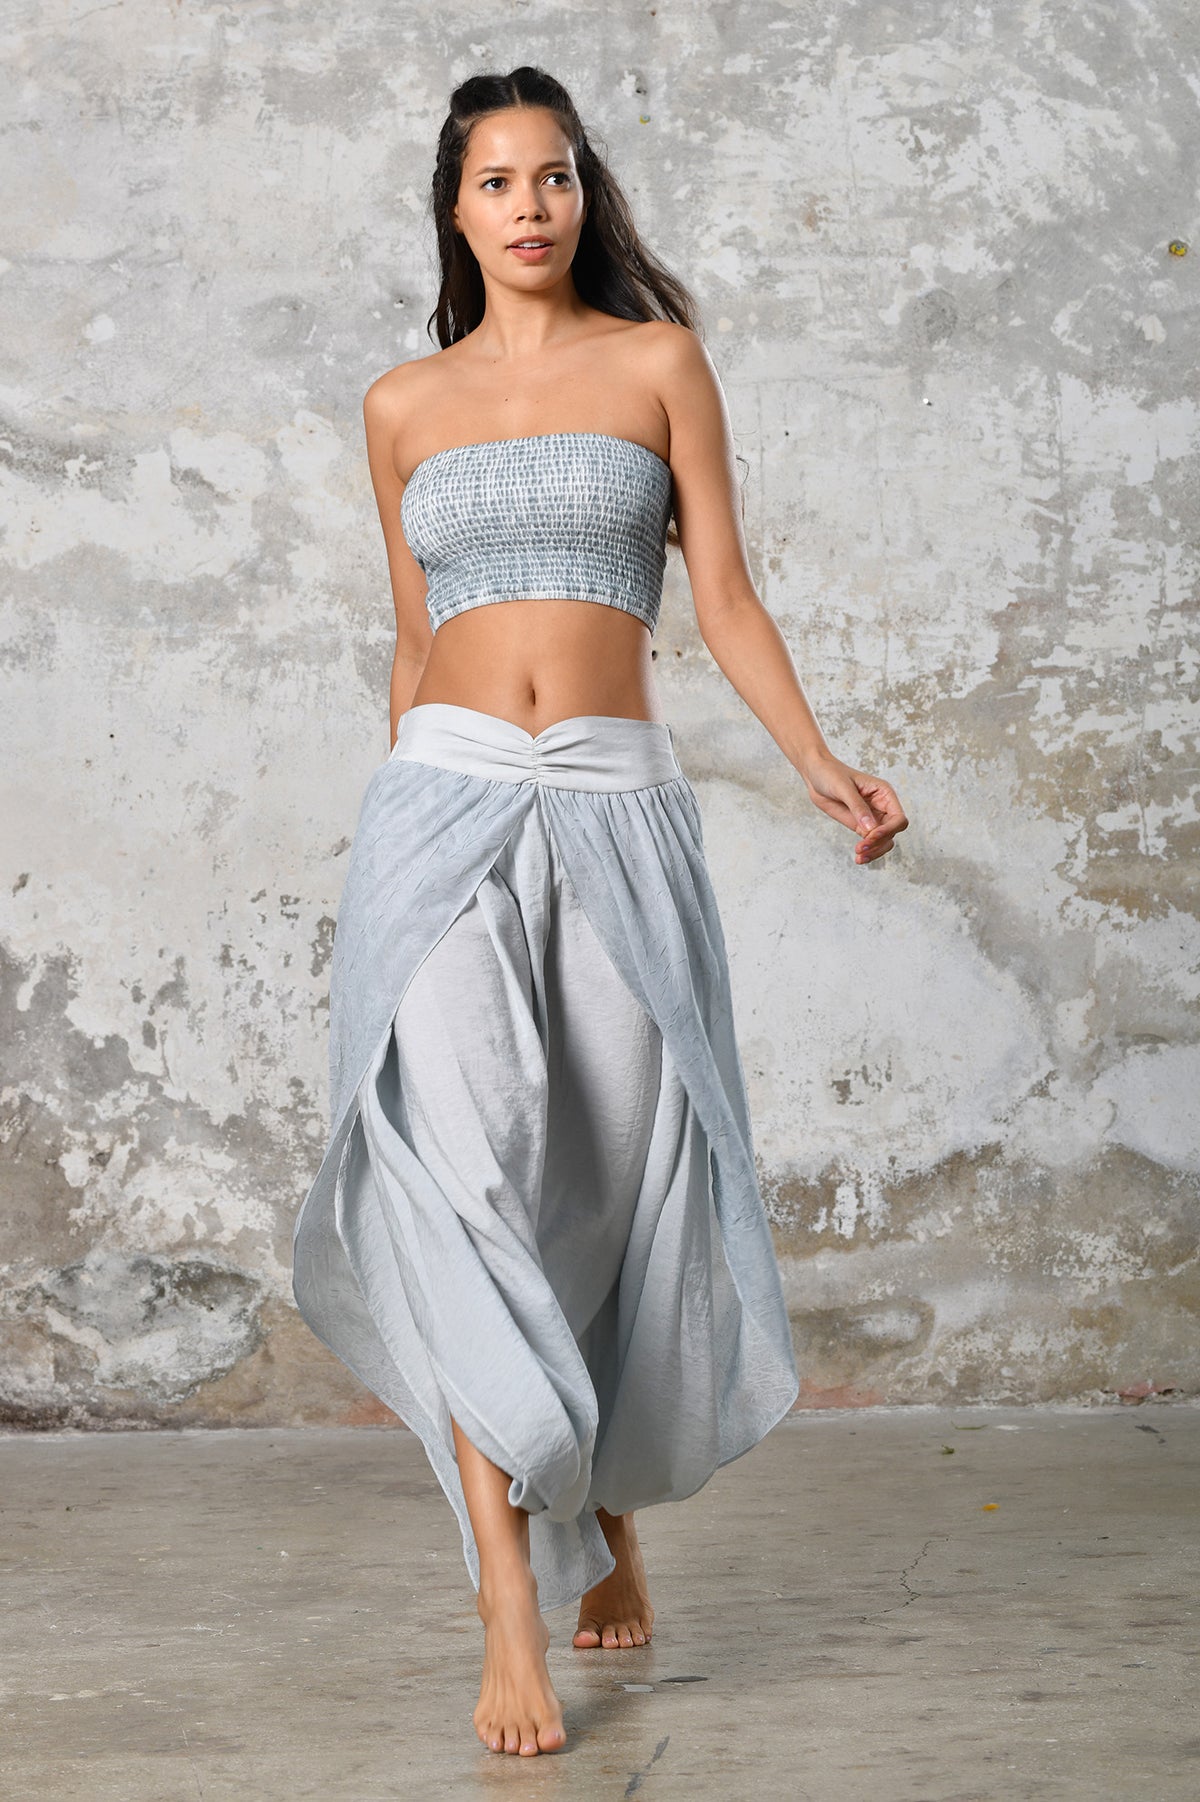 Step into timeless baby blue boho chic with our Boho high split skirt trousers. Crafted from organic materials, this sexy summer boho yoga pants , eco-conscious fashion for the modern goddess.